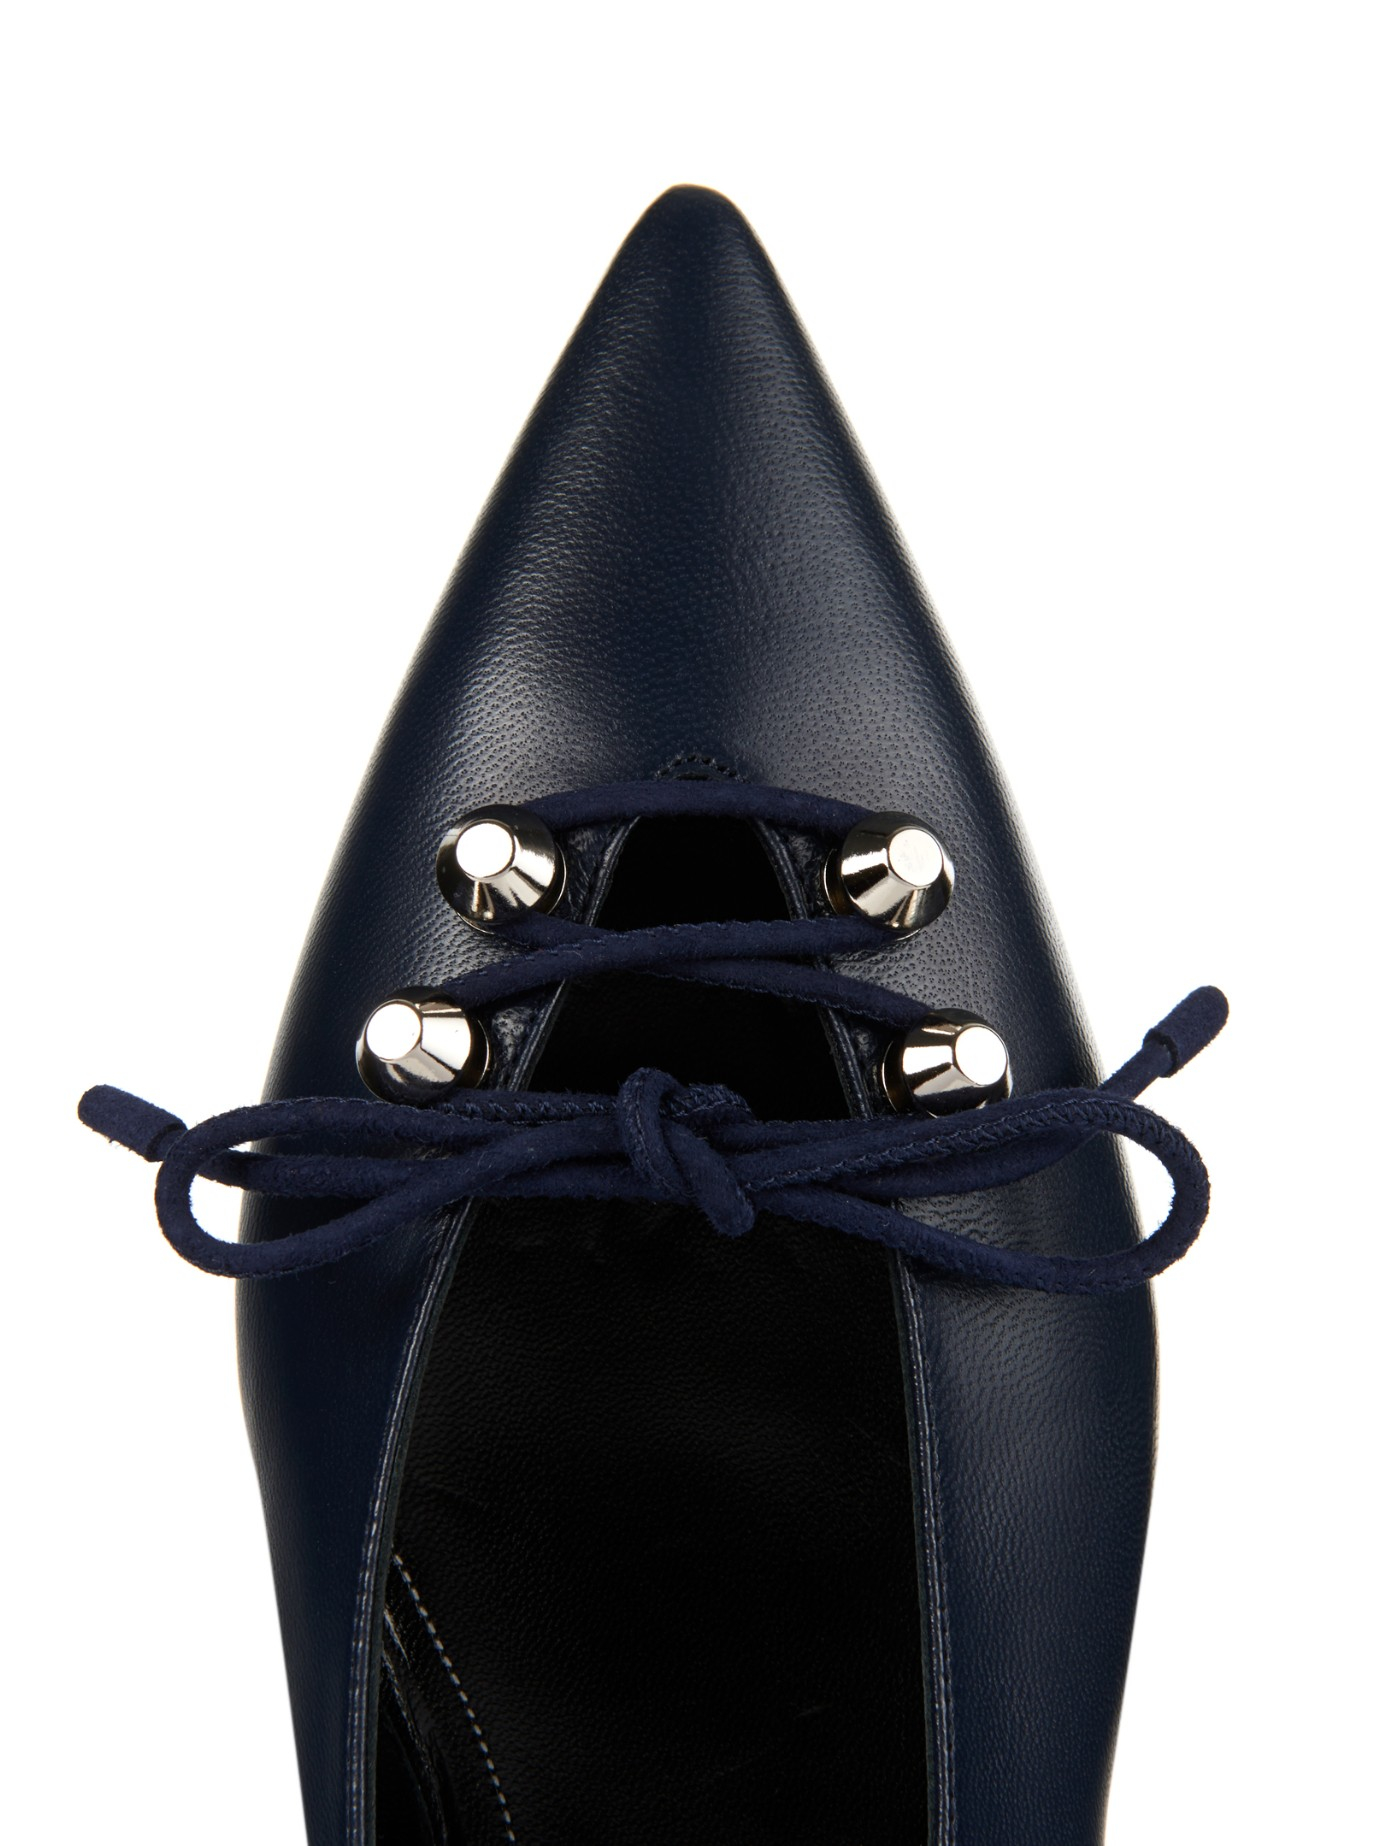 Balenciaga Leather Lace-Up Point Toe Flats in Navy (Blue) - Lyst